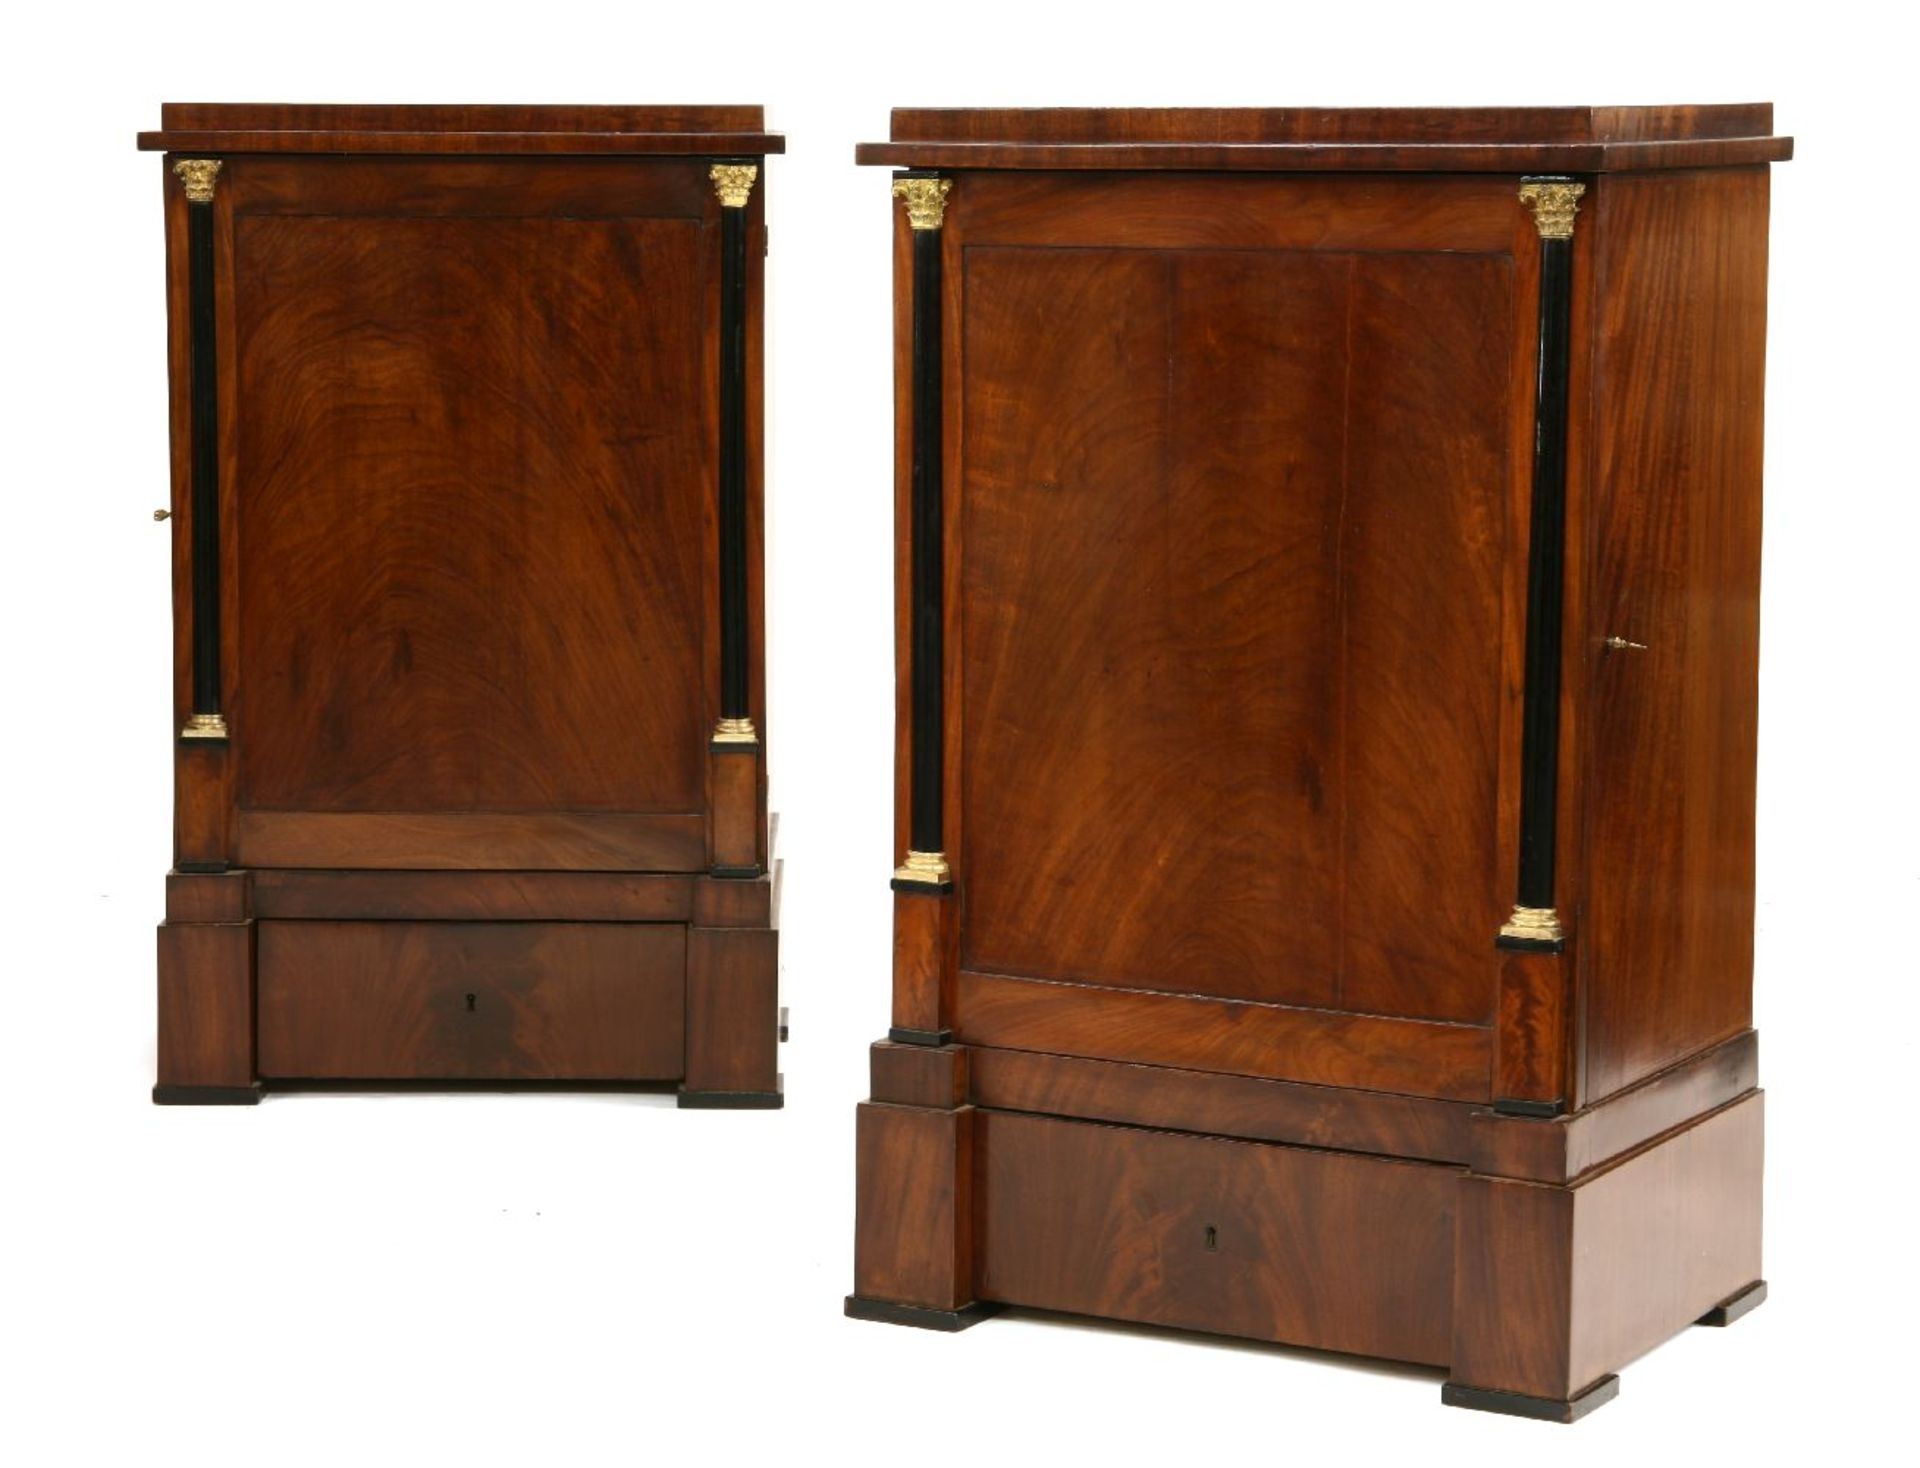 A pair of Biedermeier pedestal cabinets,the stepped tops over doors with brass-capped ebony half